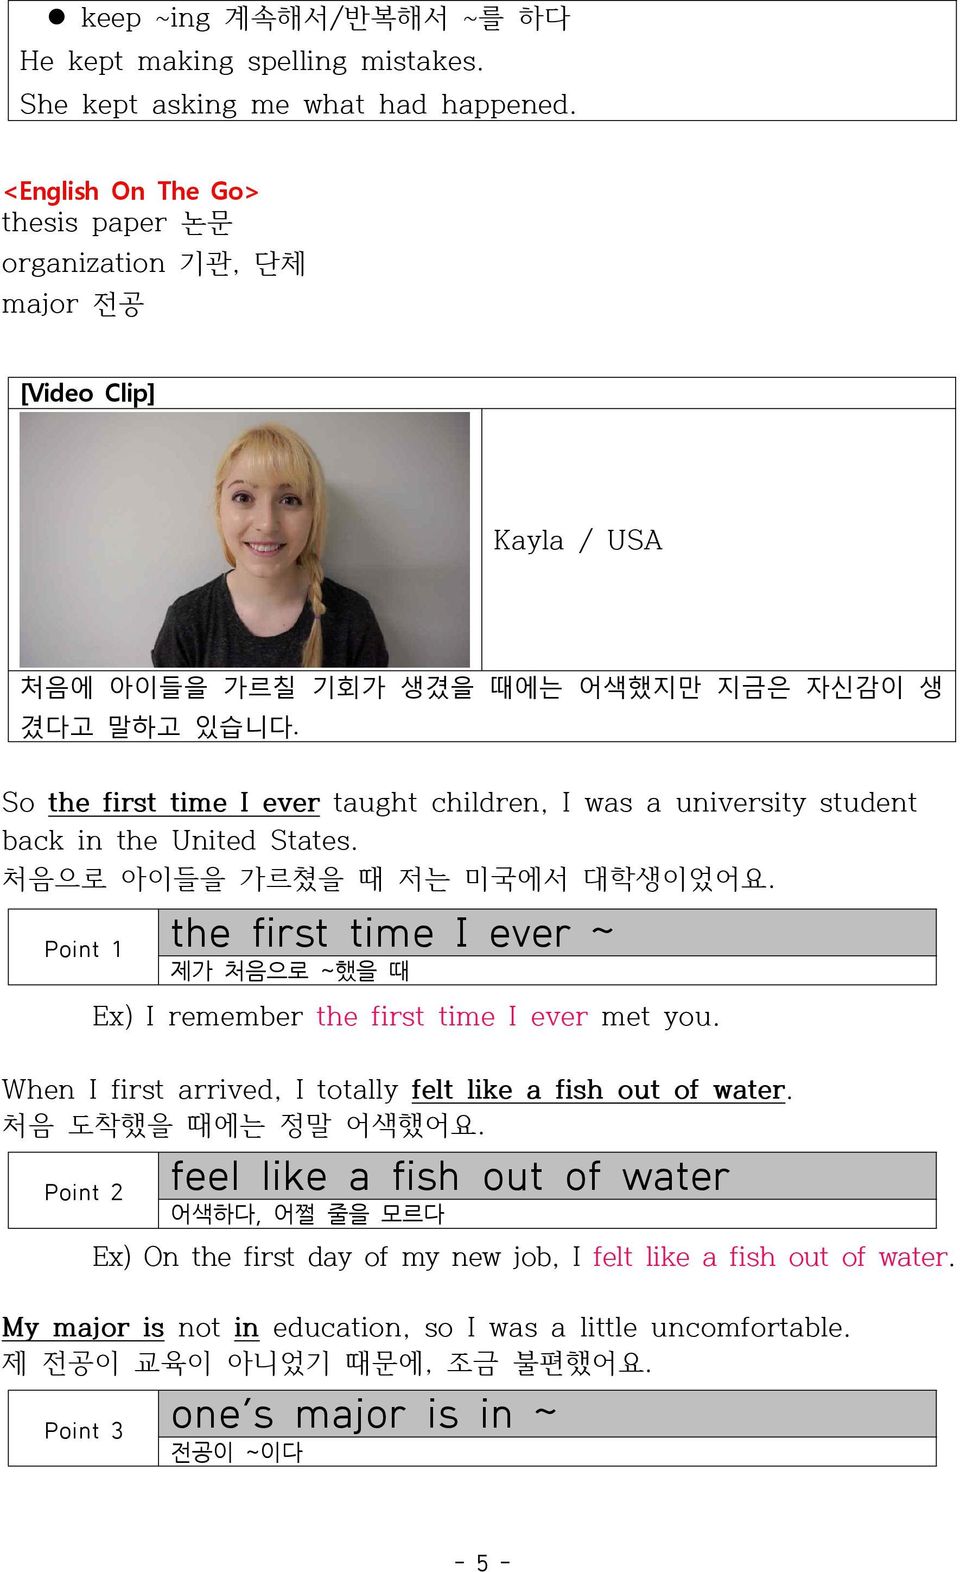 So the first time I ever taught children, I was a university student back in the United States. 처음으로 아이들을 가르쳤을 때 저는 미국에서 대학생이었어요.